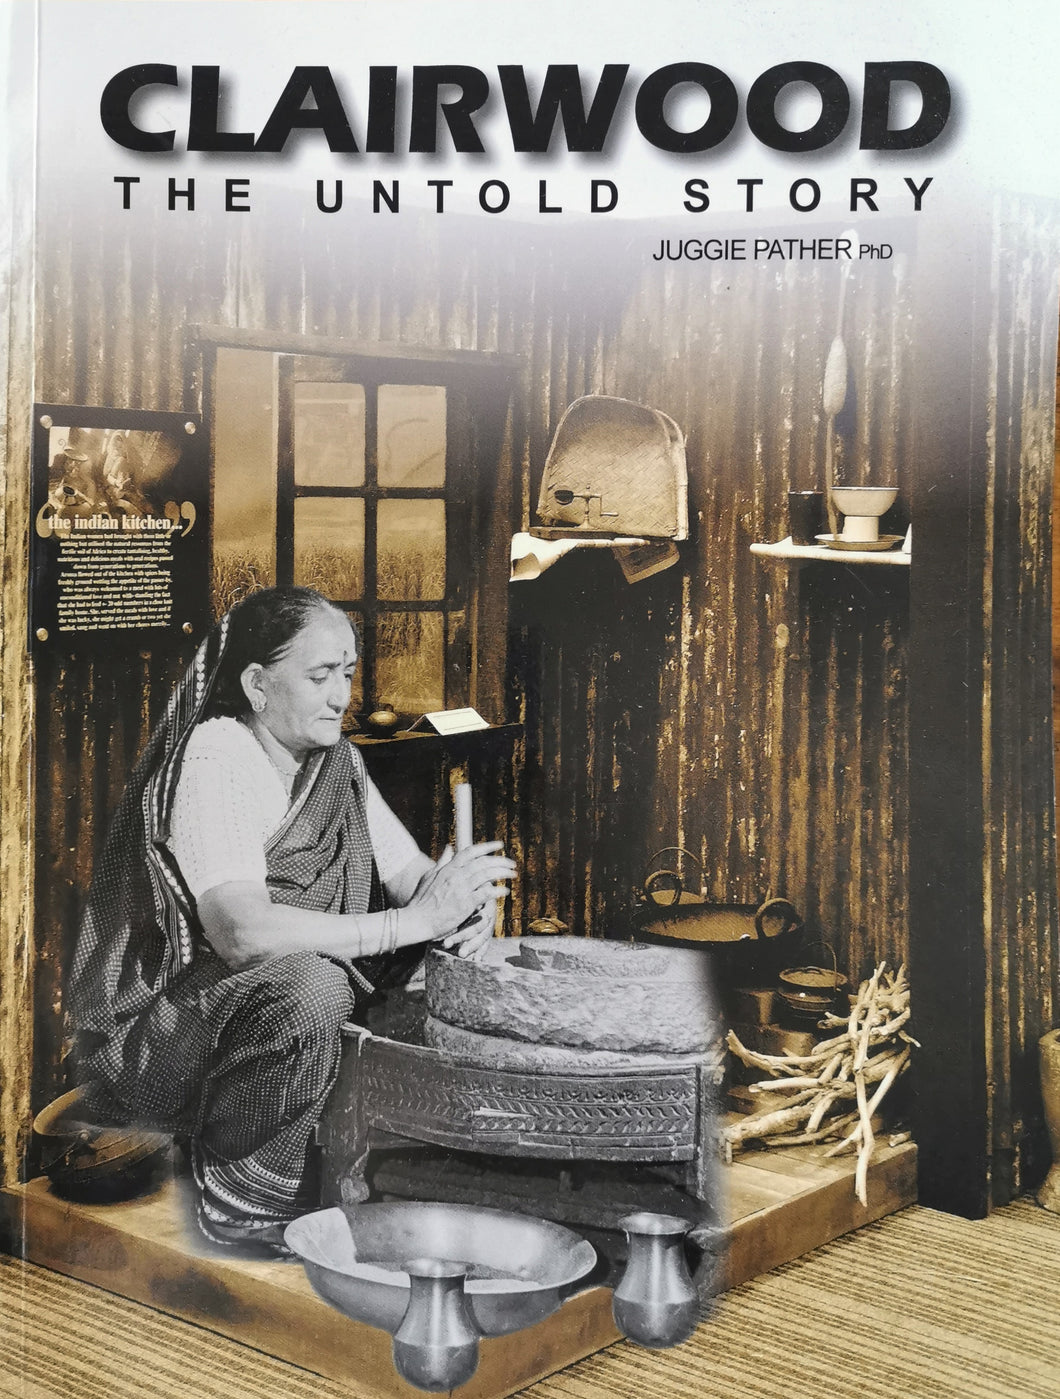 Clairwood - The Untold Story by Juggie Pather